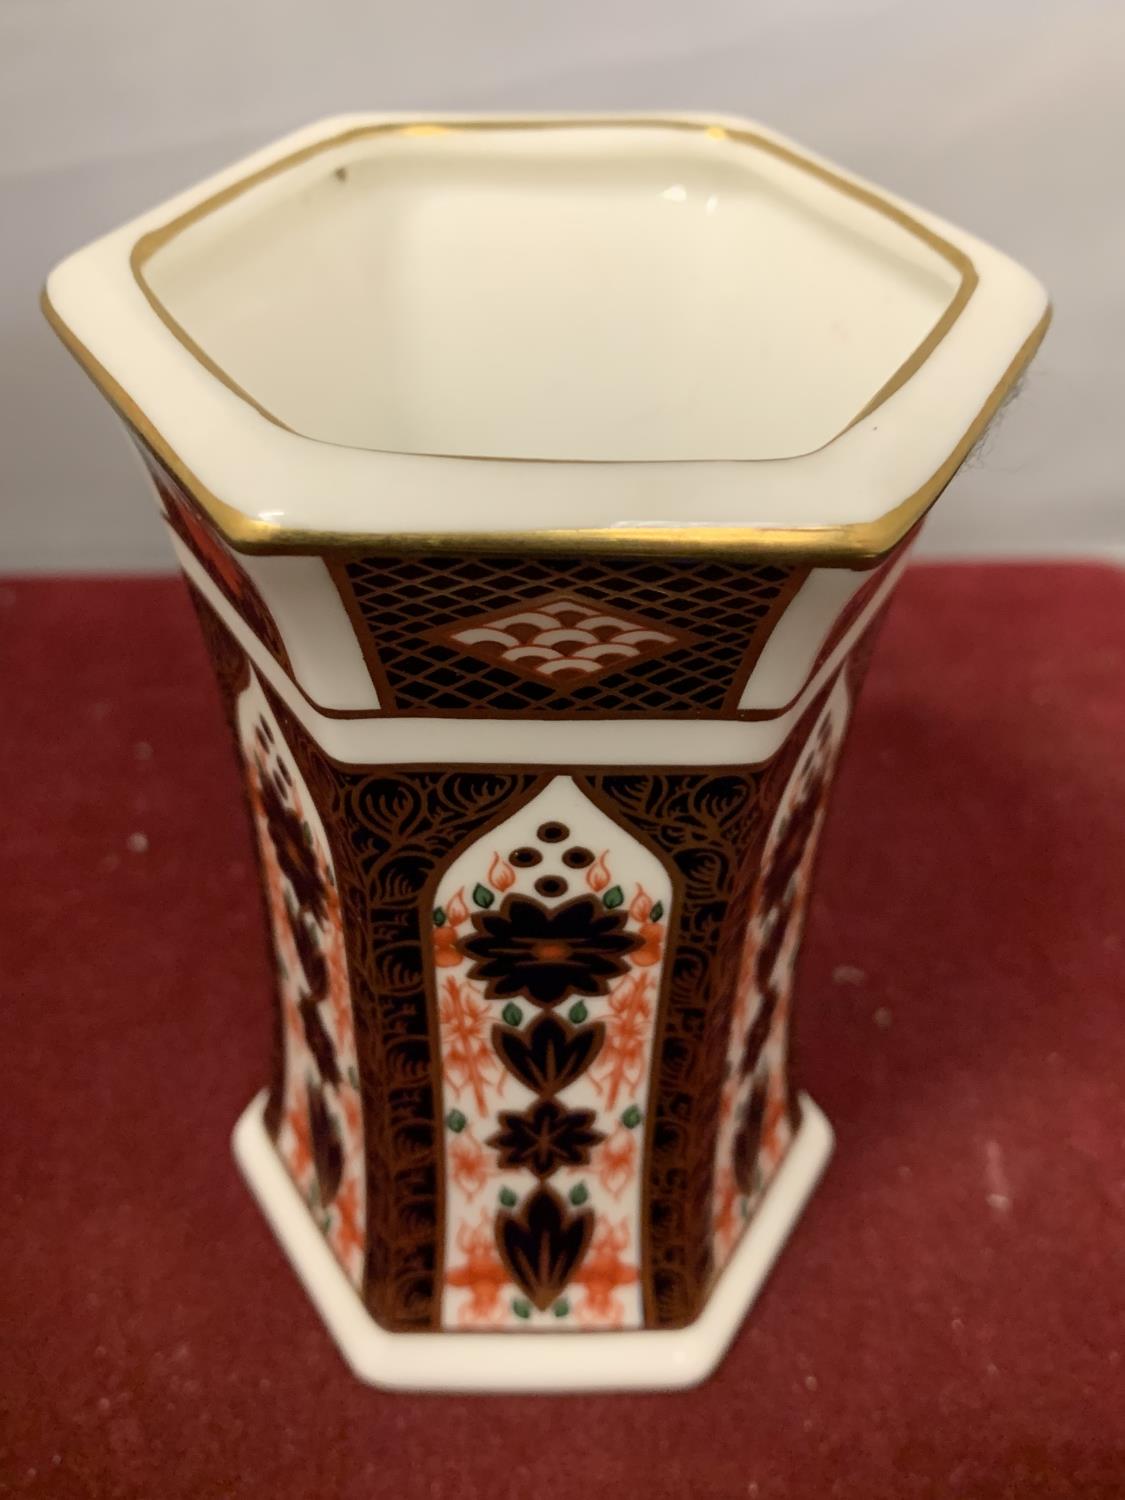 A ROYAL CROWN DERBY HEXAGONAL VASE APPROXIMATELY 11CM TALL - Image 2 of 3